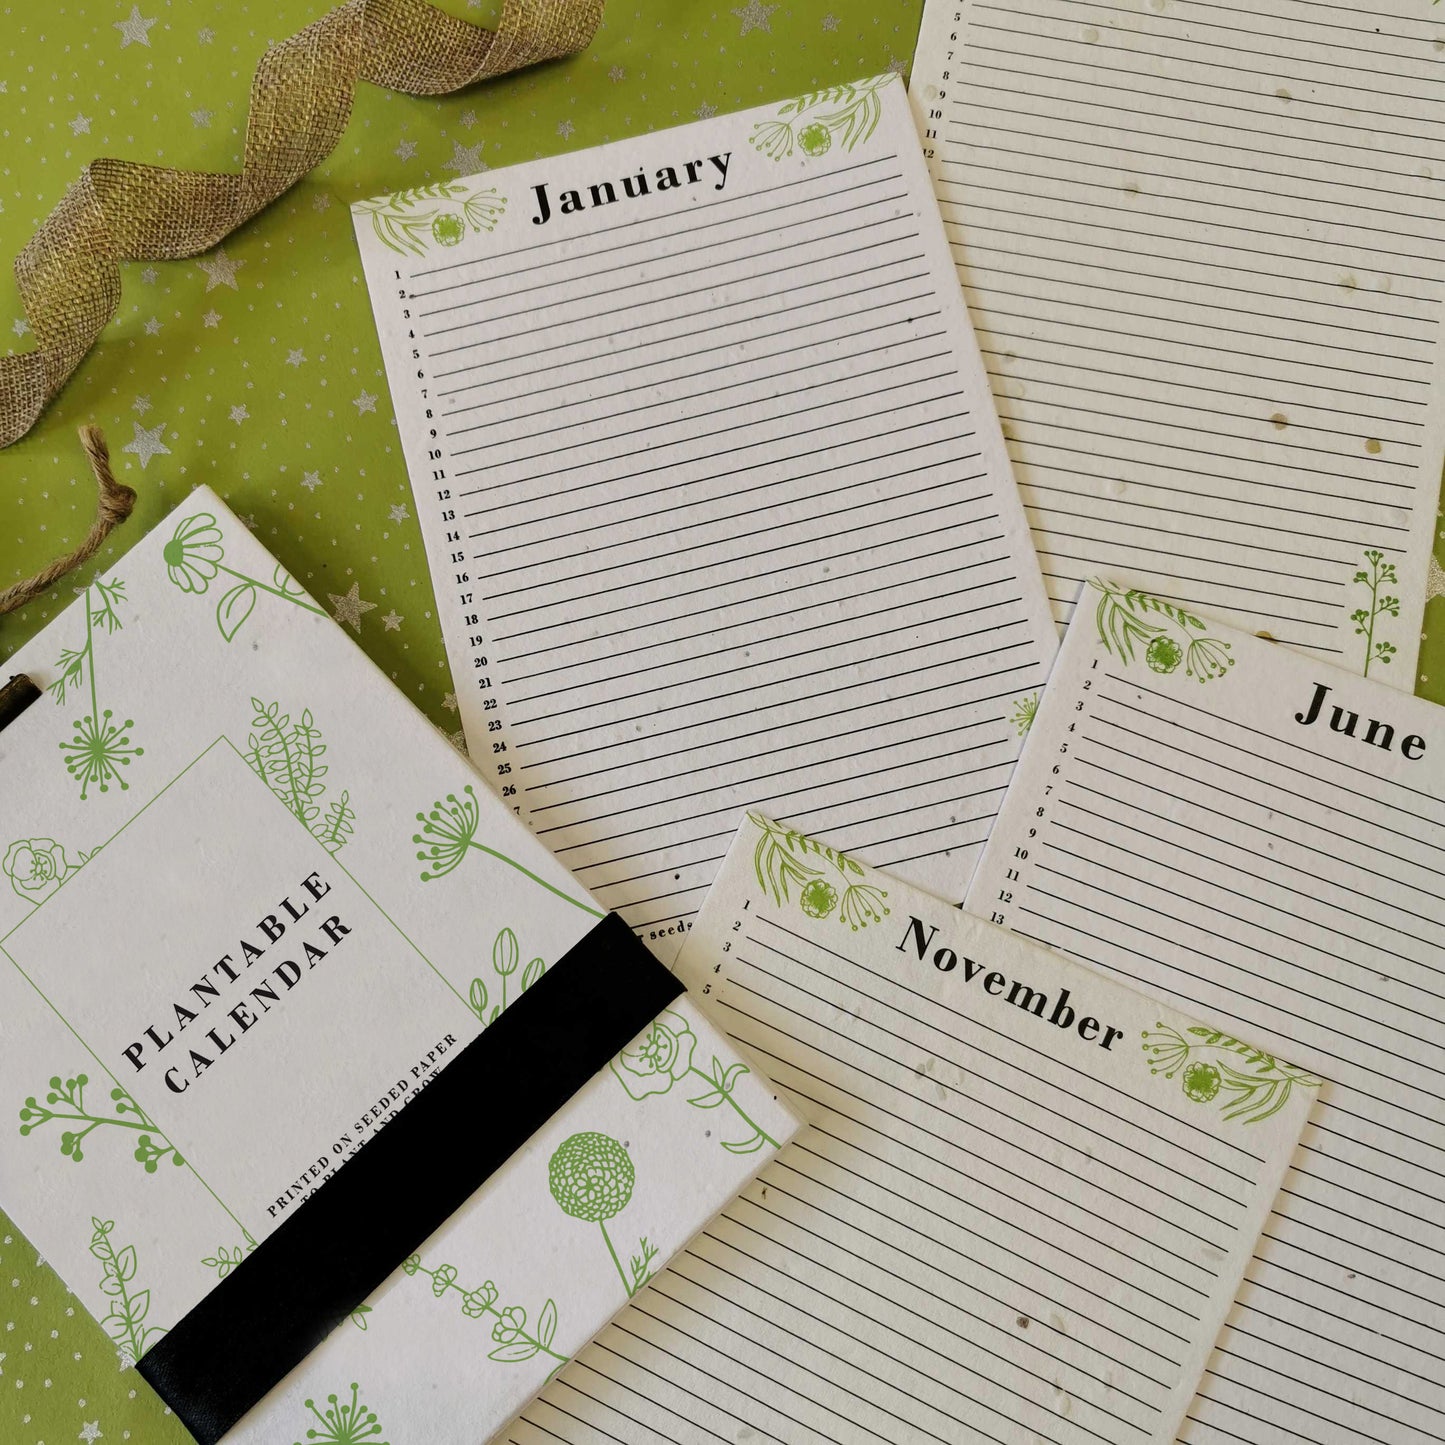 Seed Paper Plantable 12-month Calendar A5 - Green Blooms